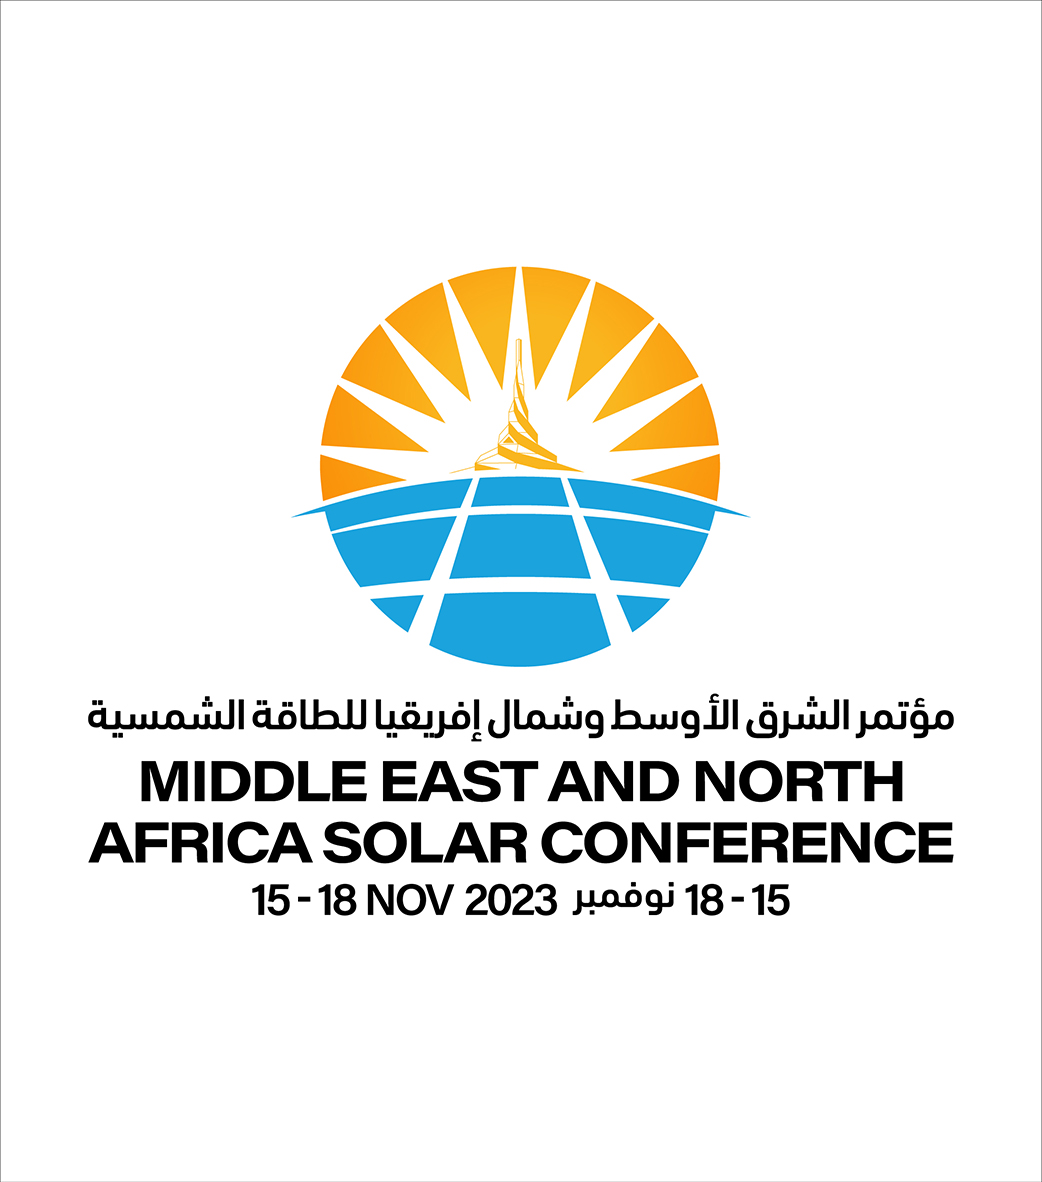 The MENA Solar Conference is organized by six topical areas. Descriptions of each area are presented below.